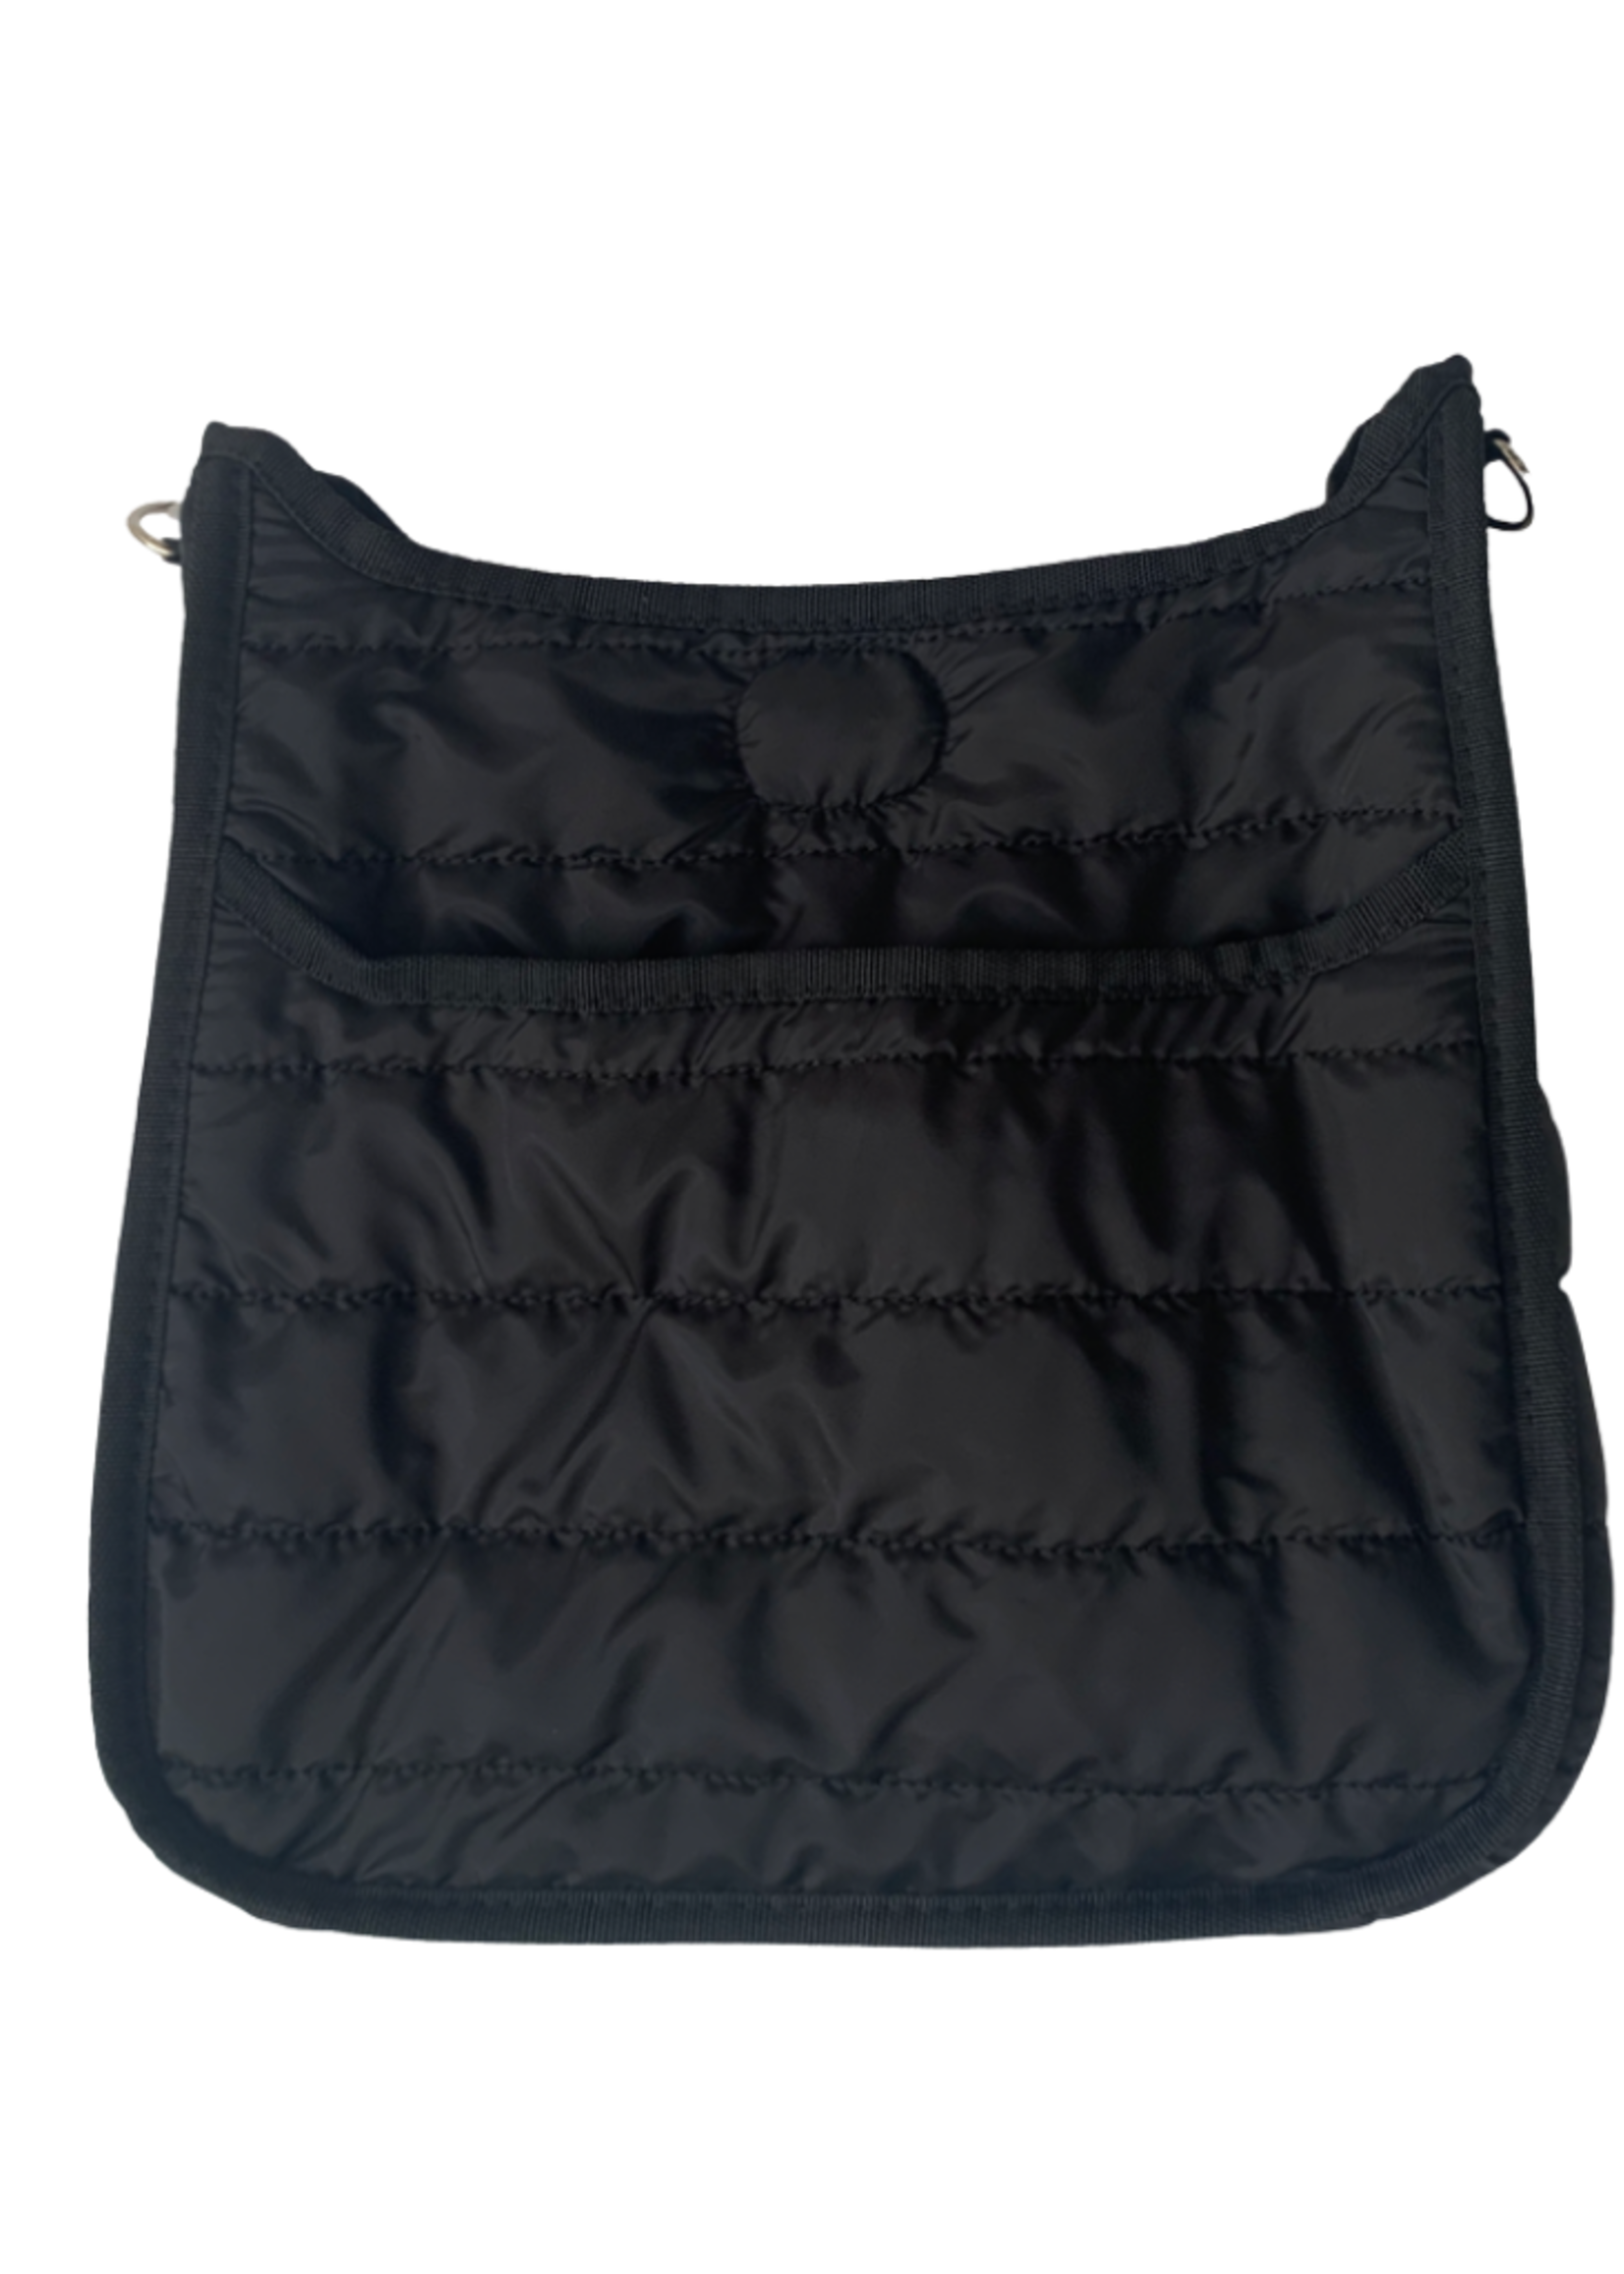 Puffy Sport Messenger Bag // Assorted Colors